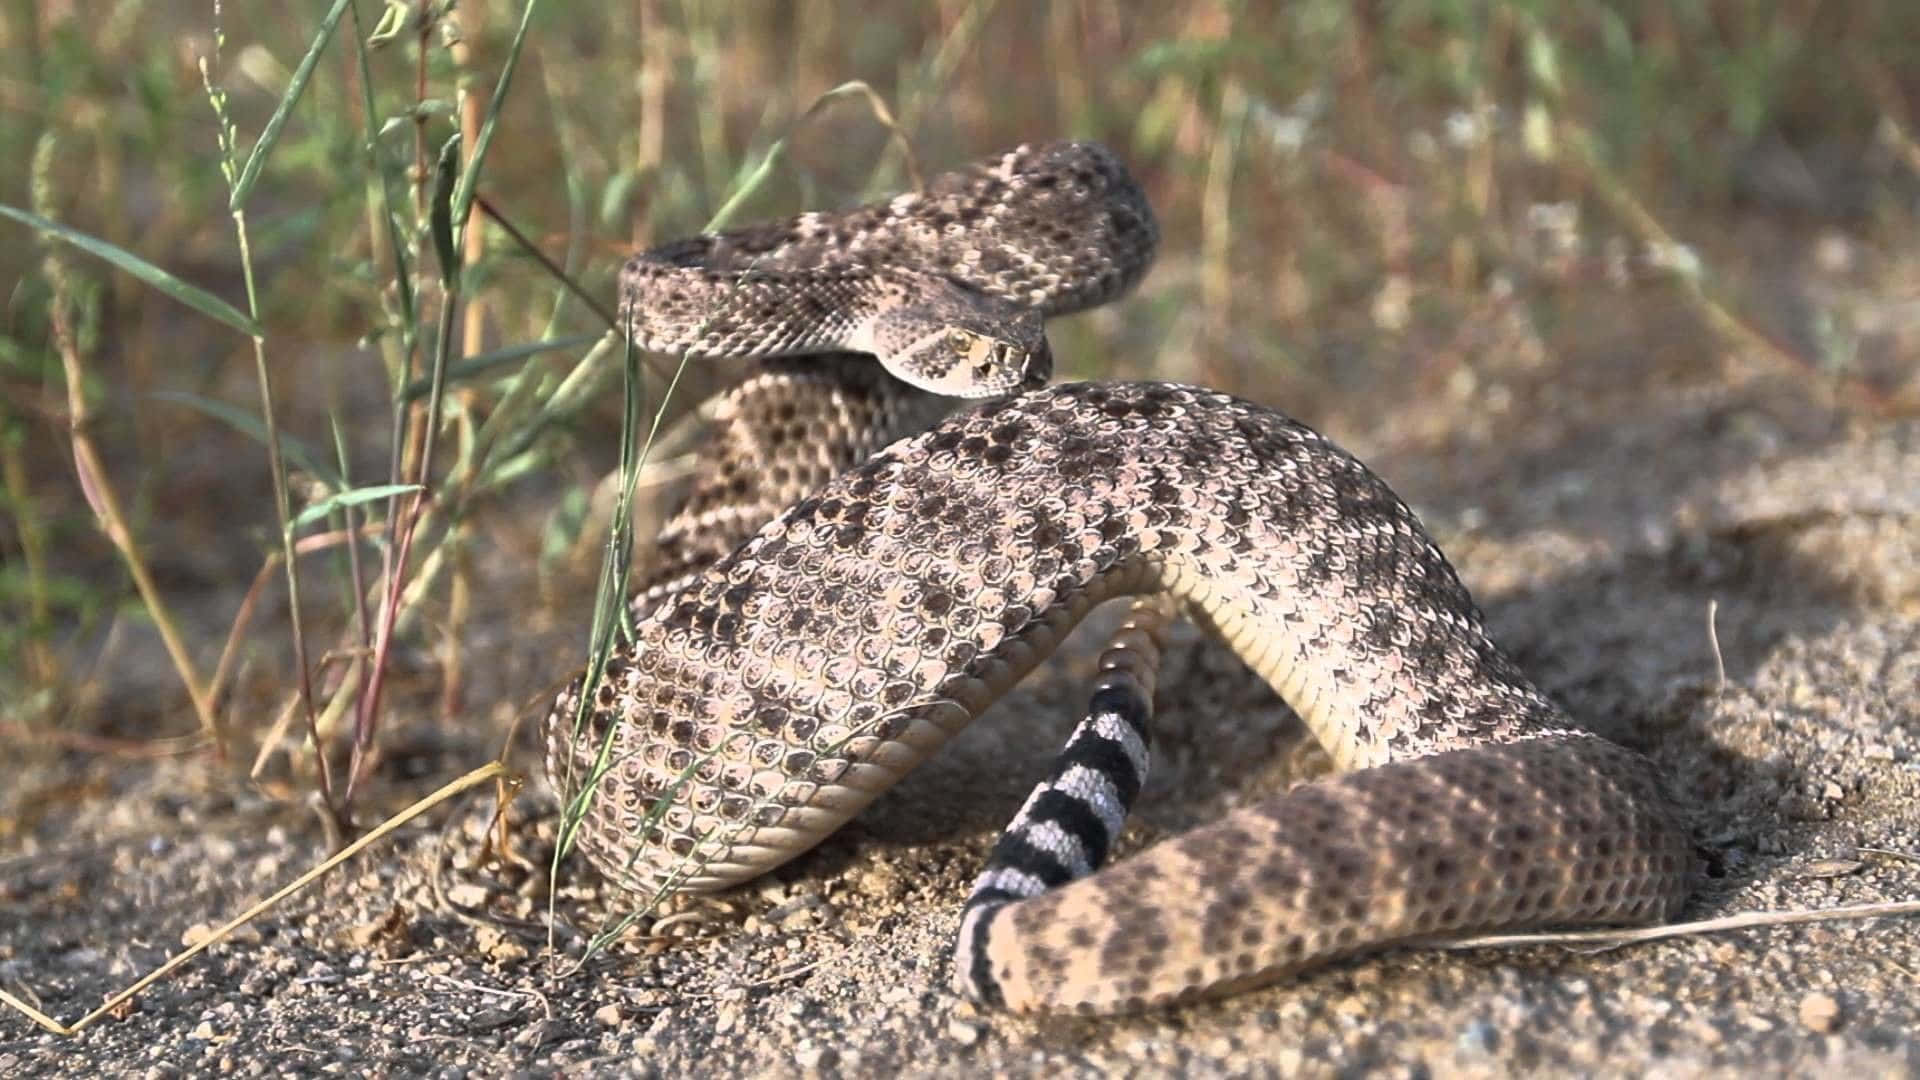 An up-close photo of a beautifully marked rattlesnake.